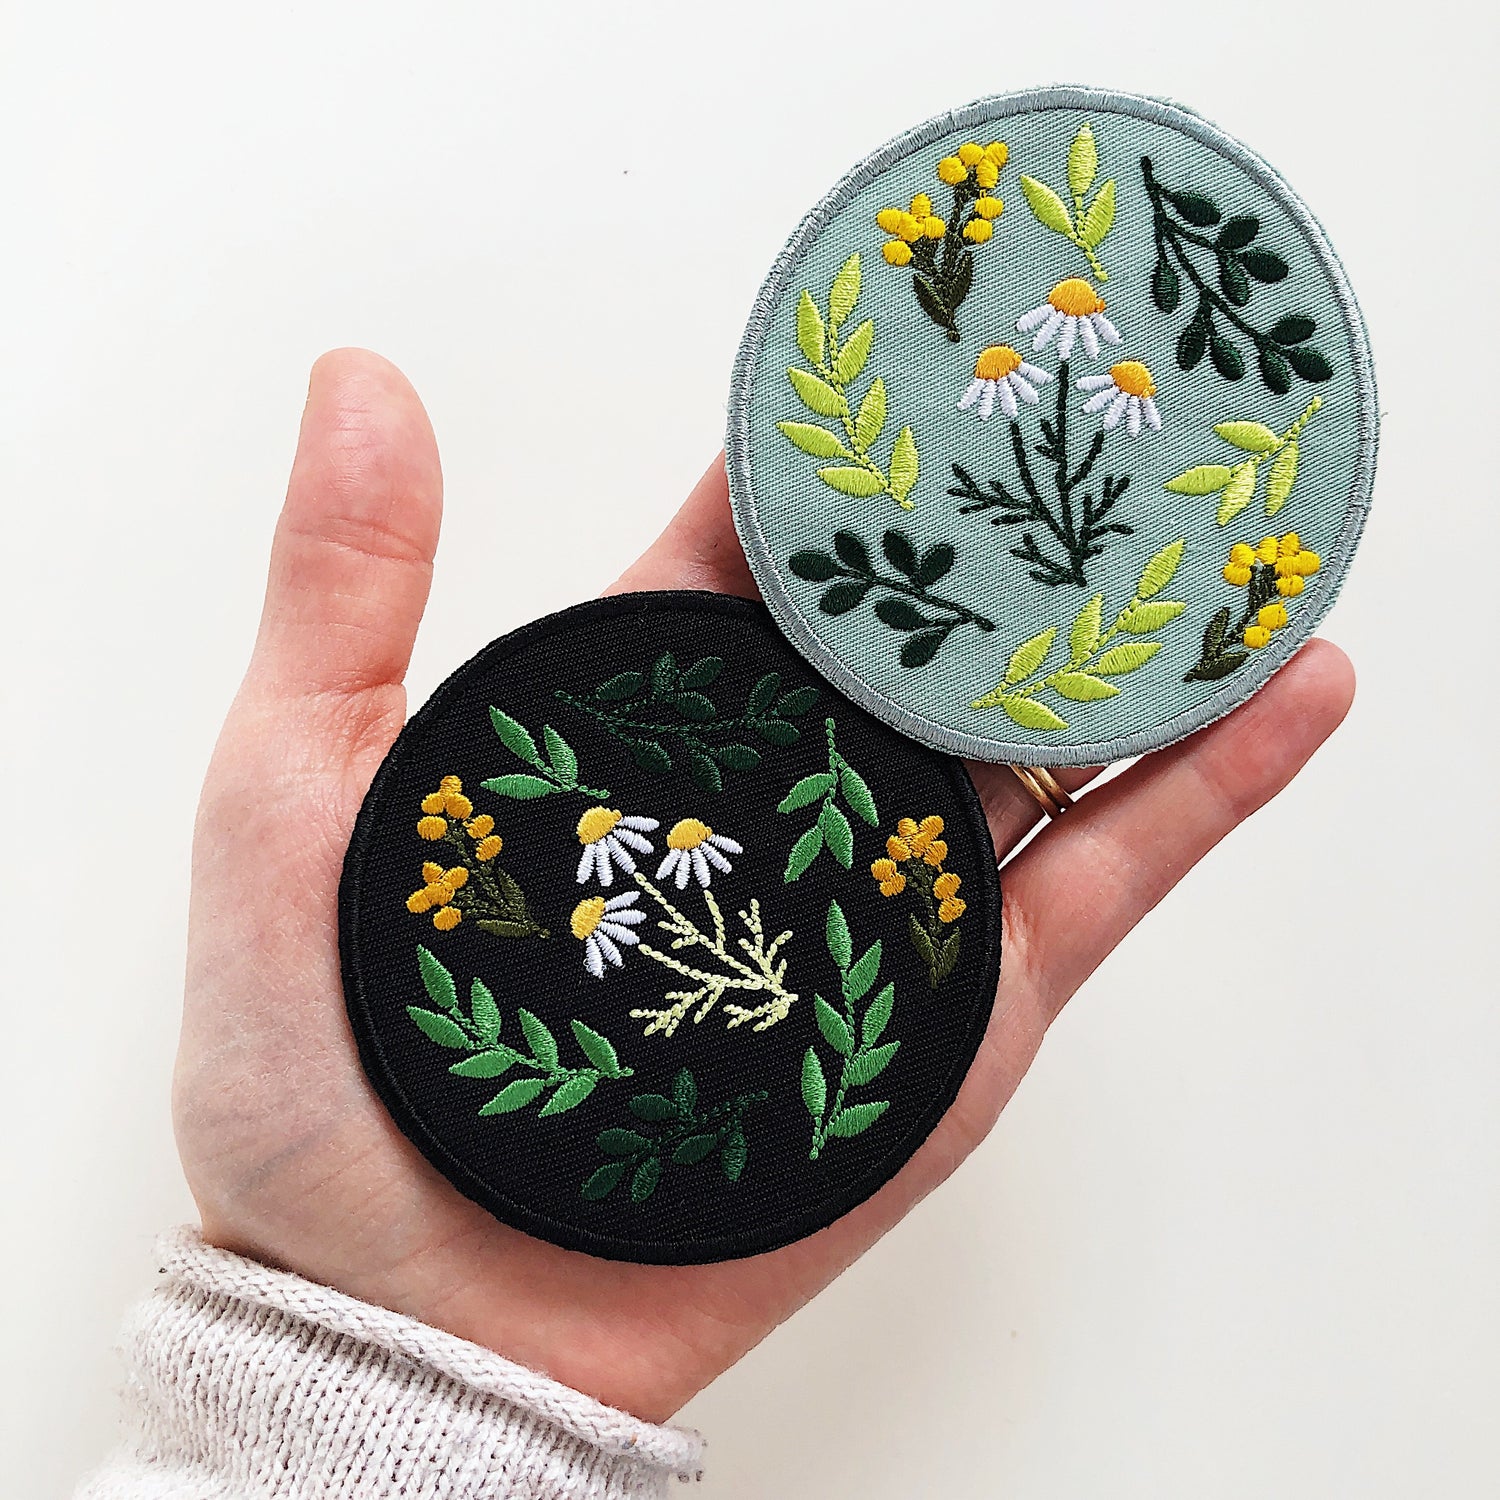 Flourishing Fibers Merchandise: Shop embroidery inspired stickers and  merchandise — Flourishing Fibers - Embroidery & Notions Like No Other